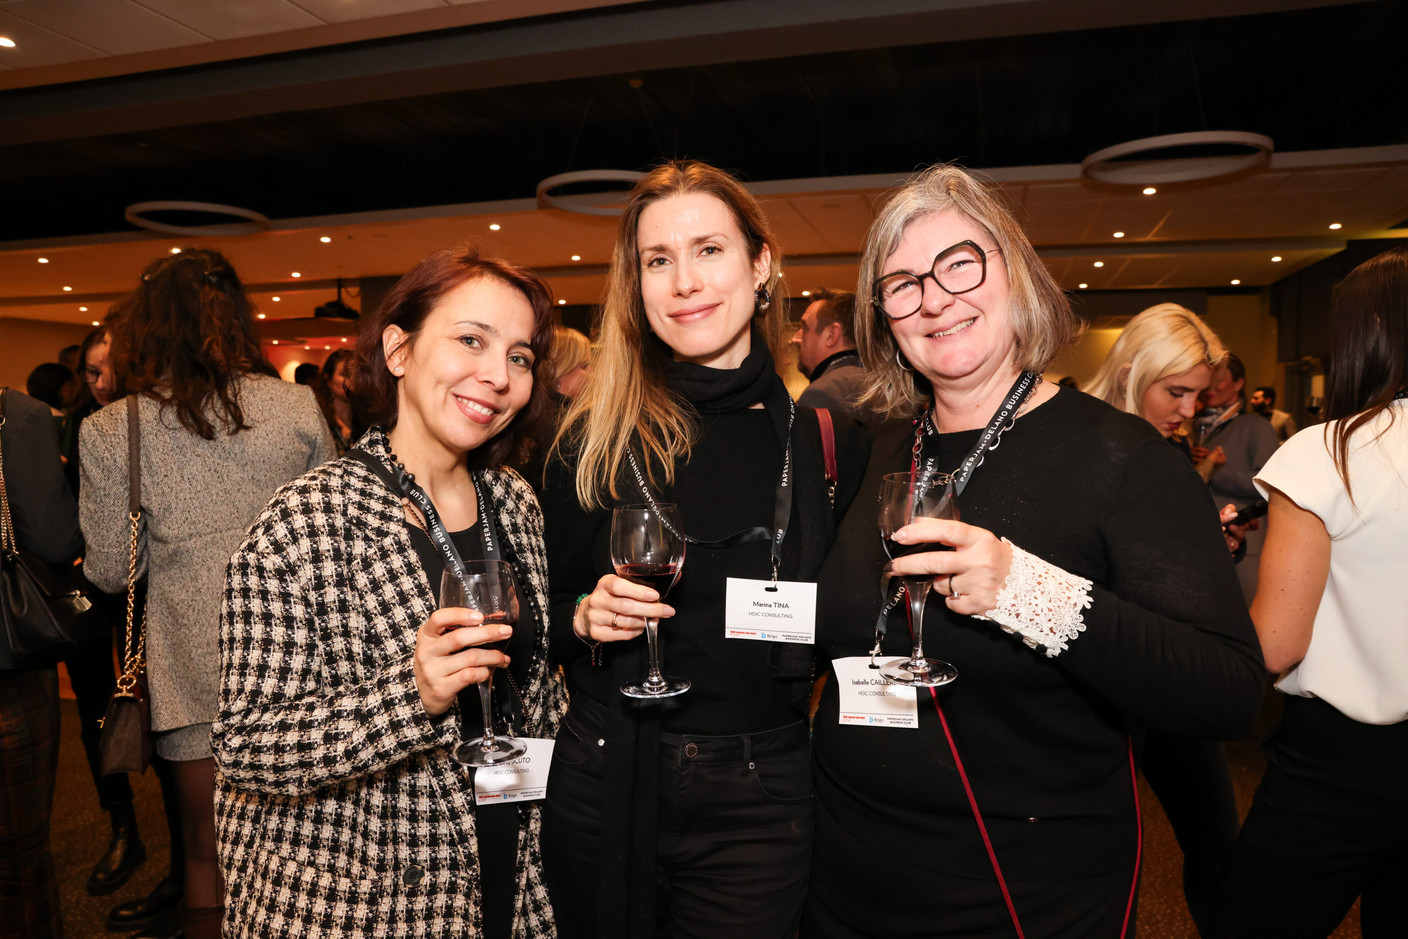 Audrey Scuto, Marina Tina et Isabelle Cailleret (HDIC Consulting). (Photo: Eva Krins/Maison Moderne)